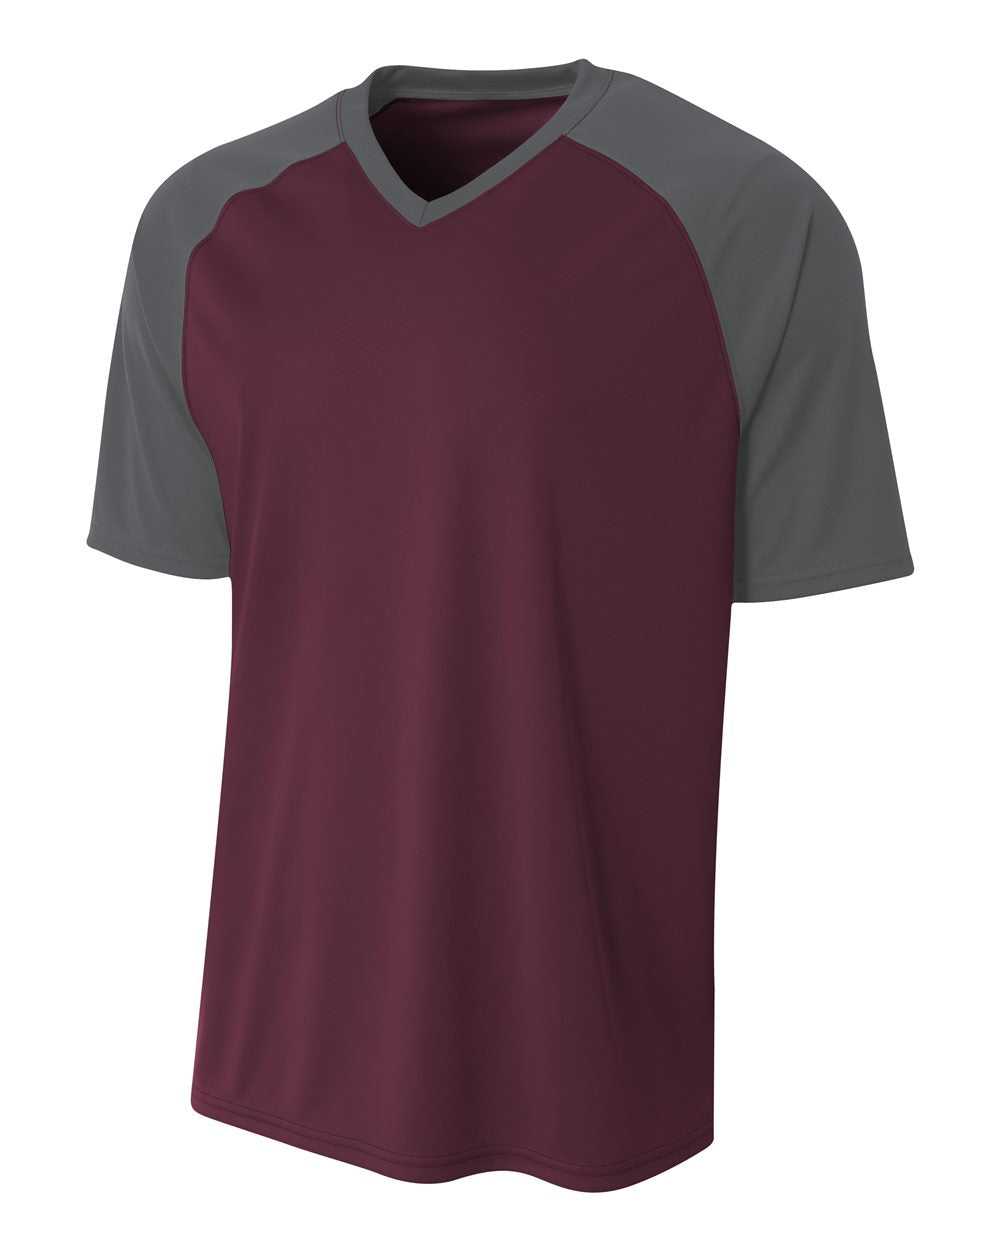 A4 N3373 Strike Jersey - Maroon Graphite - HIT a Double